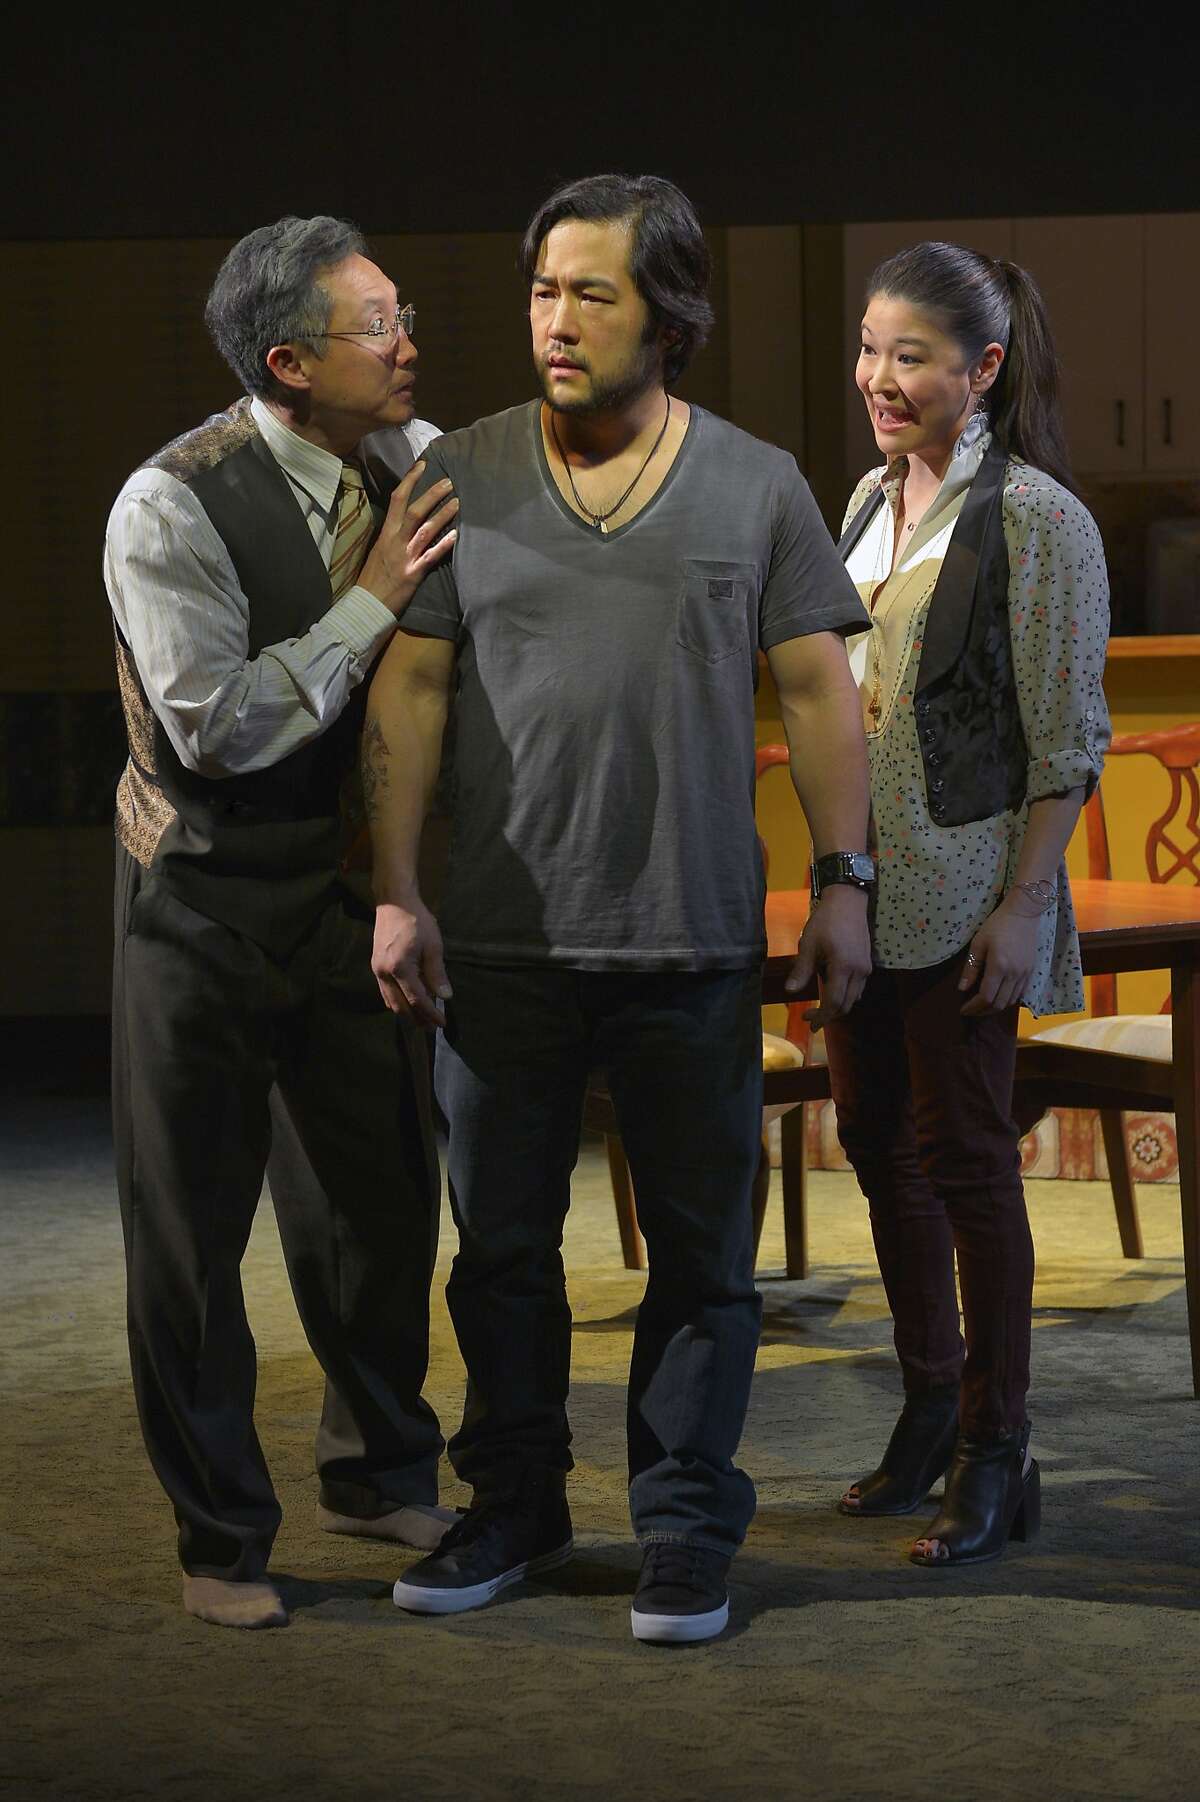 Ray (Tim Kang, center) gets together with his Uncle (Joseph Steven Yang) and Cornelia (Jennifer Lim) in Julia Cho's "Aubergine" at Berkeley Repertory Theatre